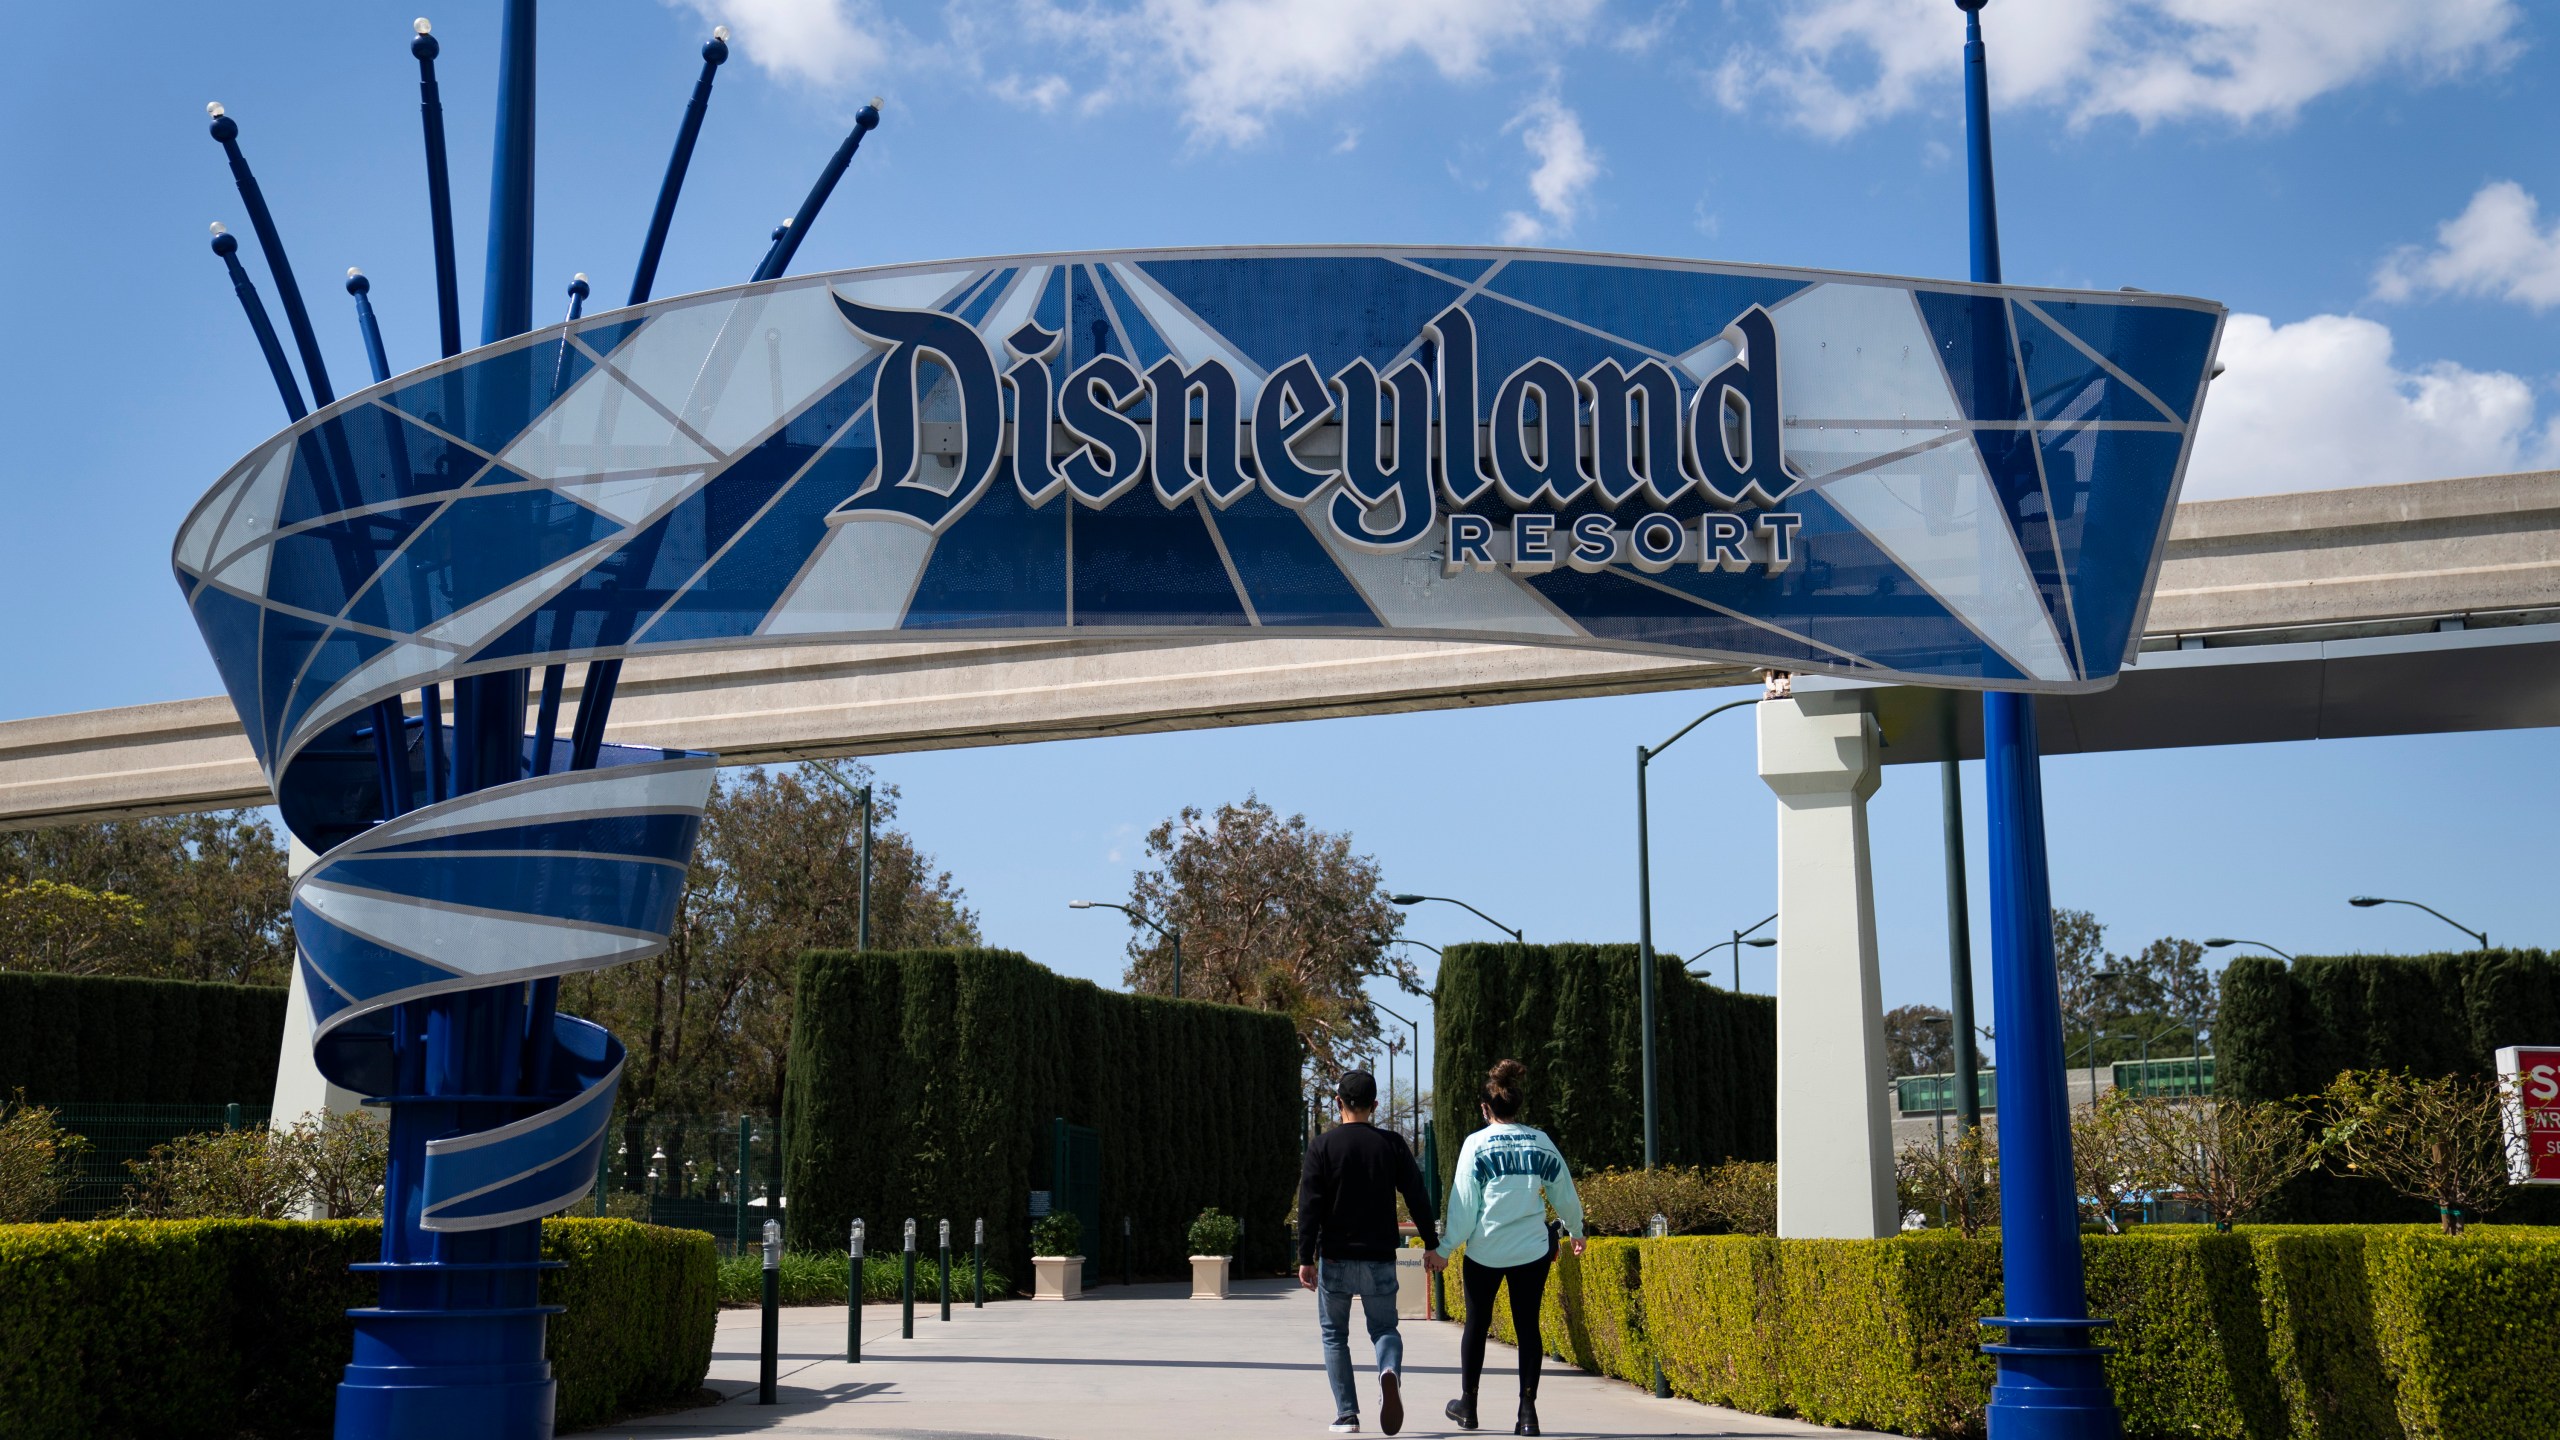 FILE - Two visitors enter Disneyland Resort in Anaheim, Calif., March 9, 2021. Disney is seeking approval from local officials to expand its California theme park offerings over the next four decades. The proposal wouldn't increase the company's geographic footprint in Anaheim, Calif., but would allow for new attractions, for example, on what is currently a large parking lot. (AP Photo/Jae C. Hong, File)